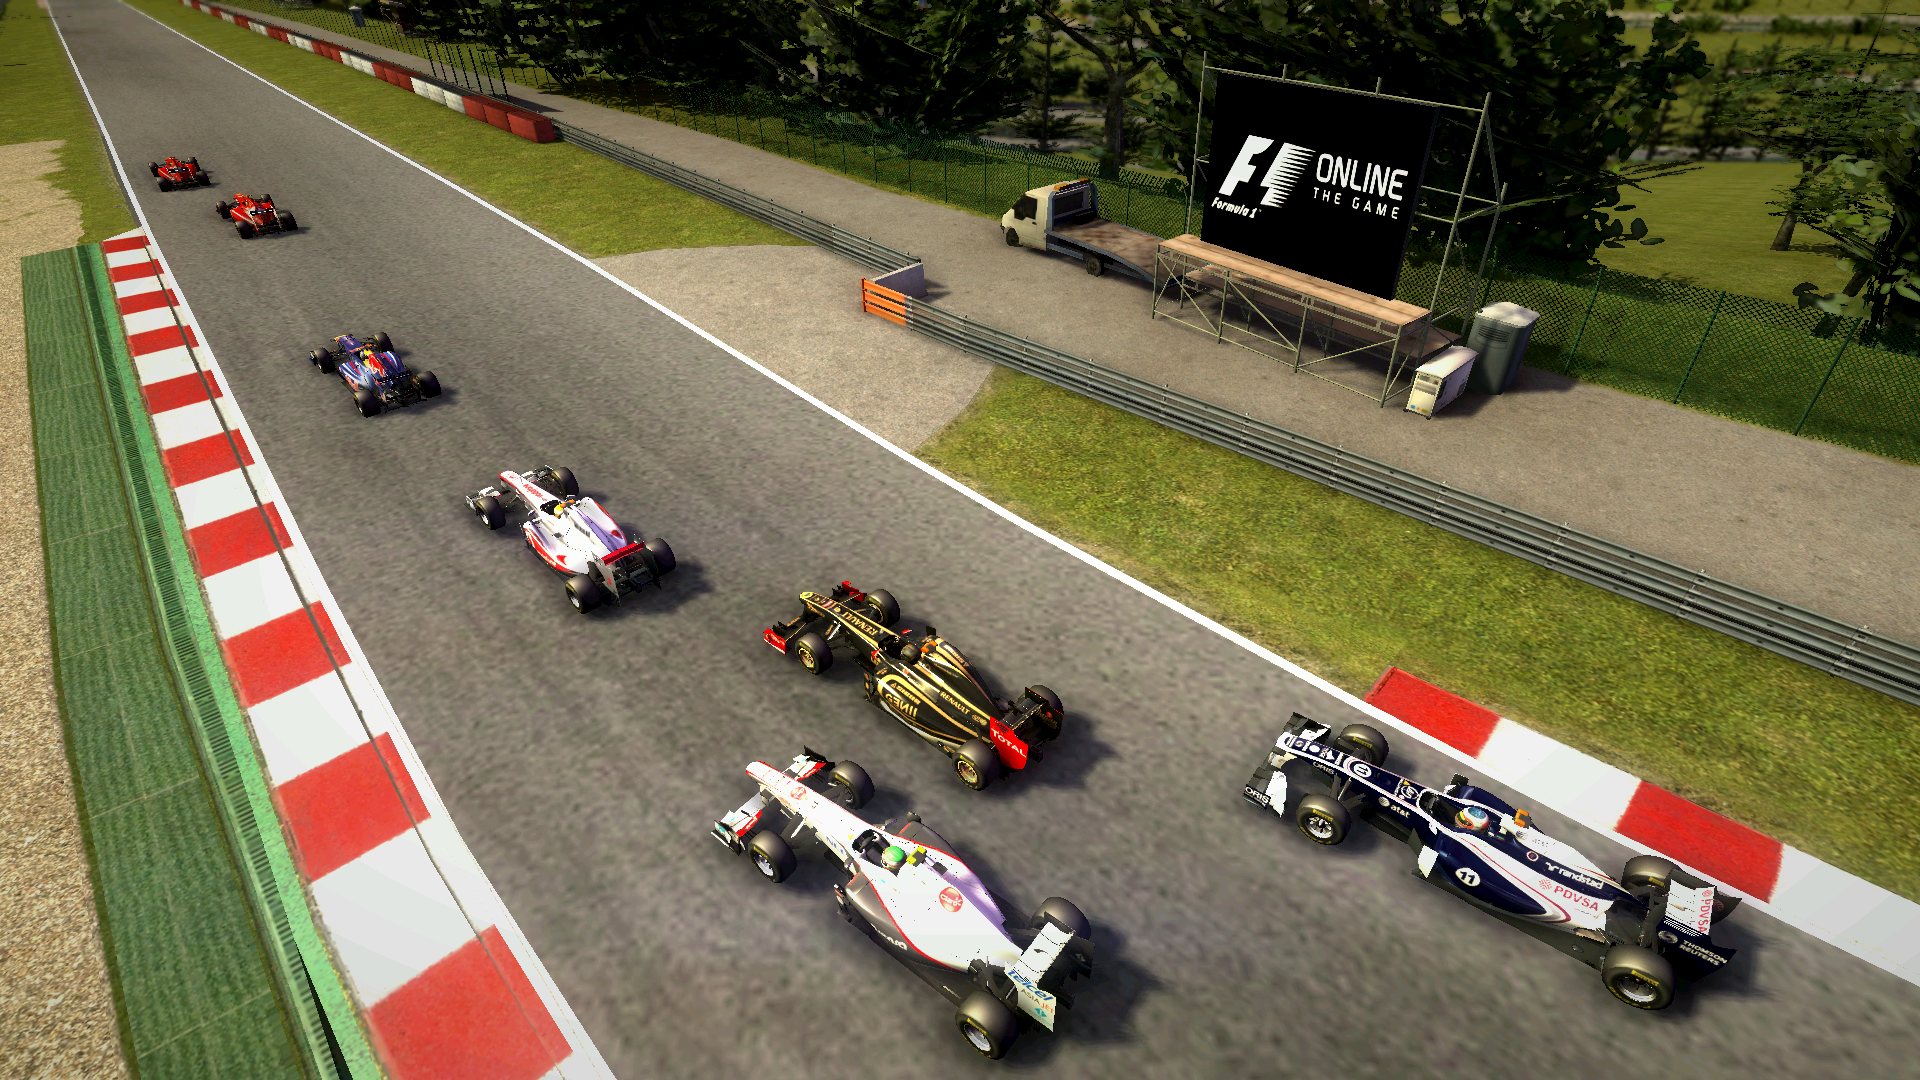 F1 Online The Game interview